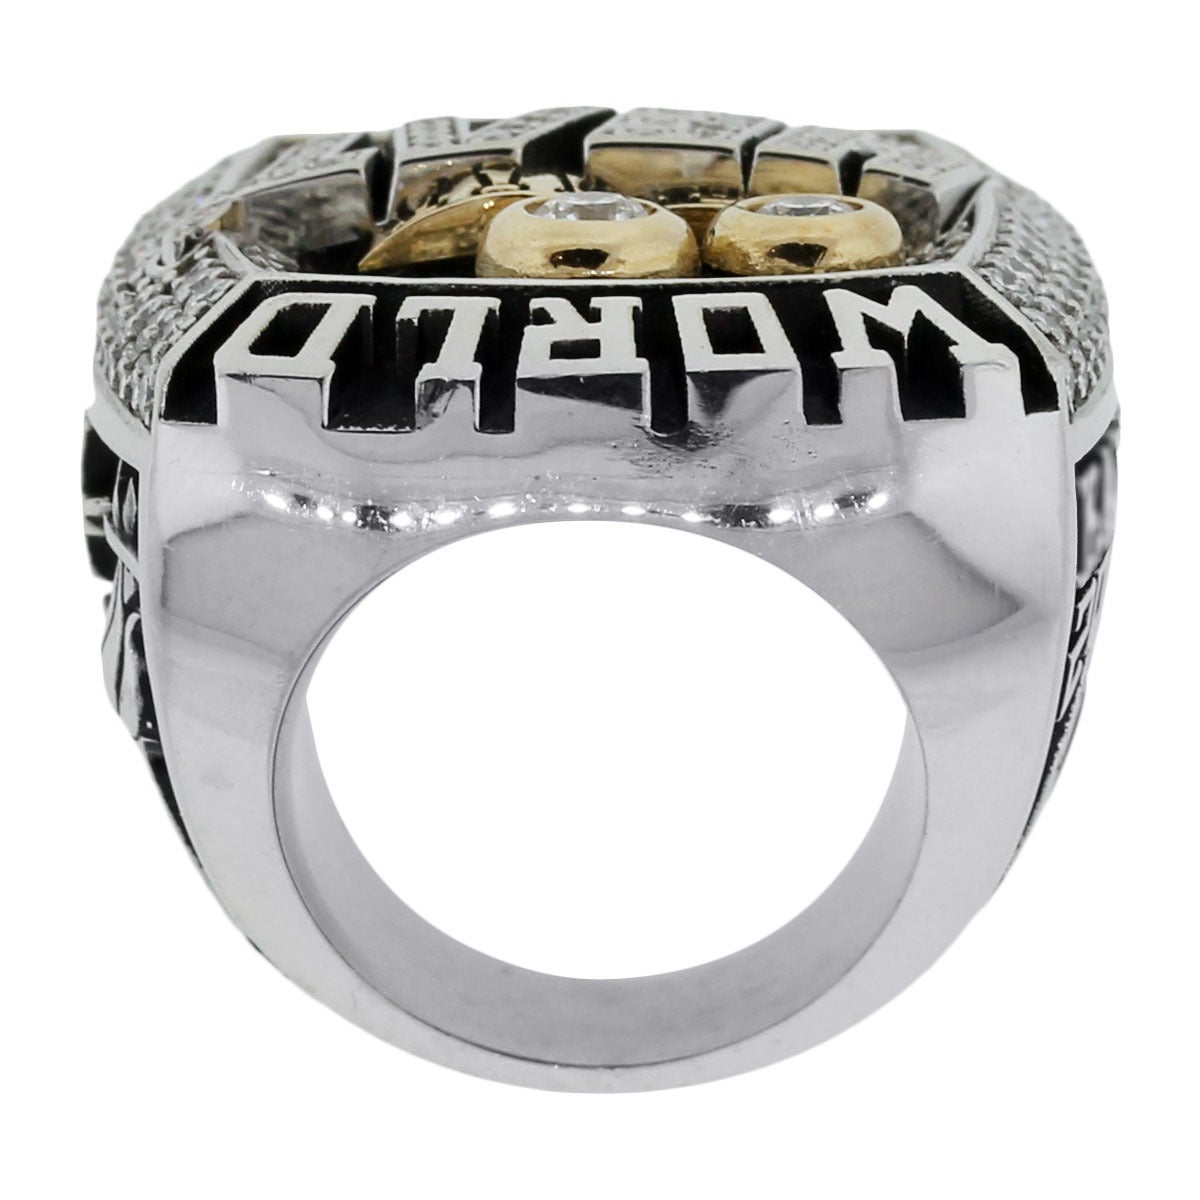 Style: Miami Heat 2013 World Championship Executive II Ring
Material: 10k Yellow and White Gold
Diamond Details: 145 Round Brilliant diamonds with approximately 3.9ctw of Diamonds total. The 2 diamonds in the Larry O'Brien Trophy are SI1-G. All